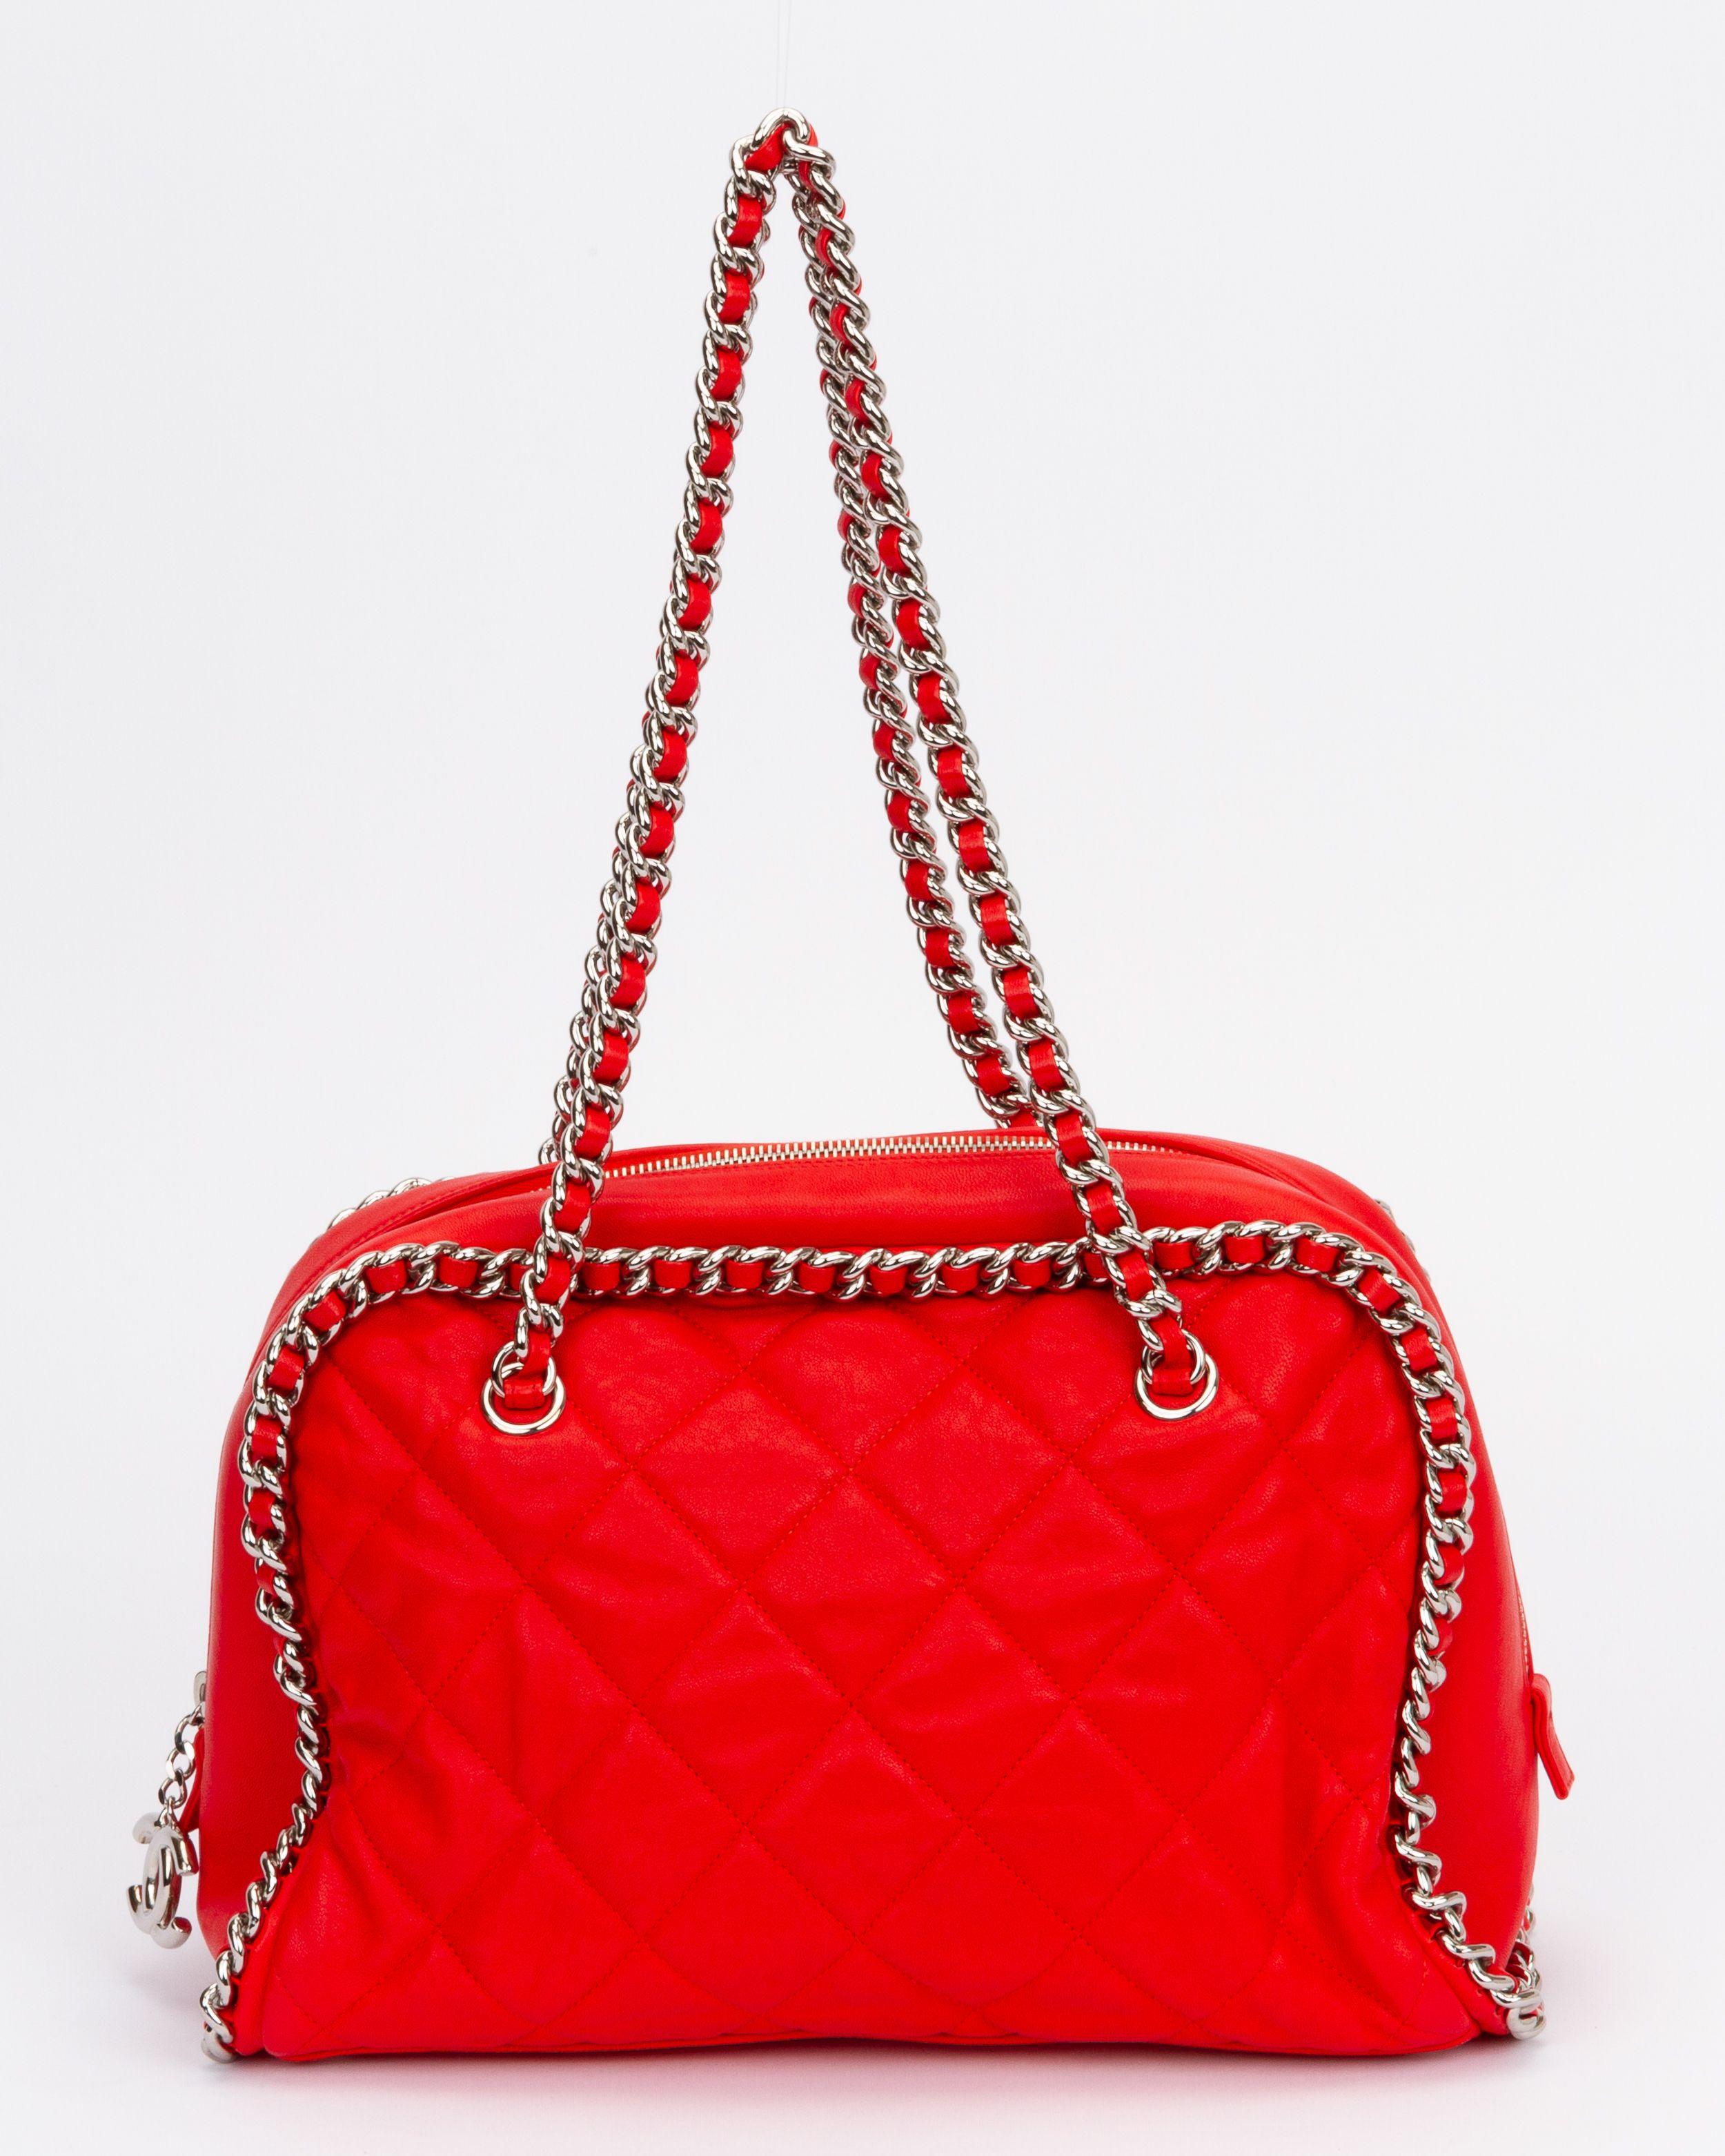 Chanel Red Chain Around Shoulder Bag In Excellent Condition For Sale In West Hollywood, CA